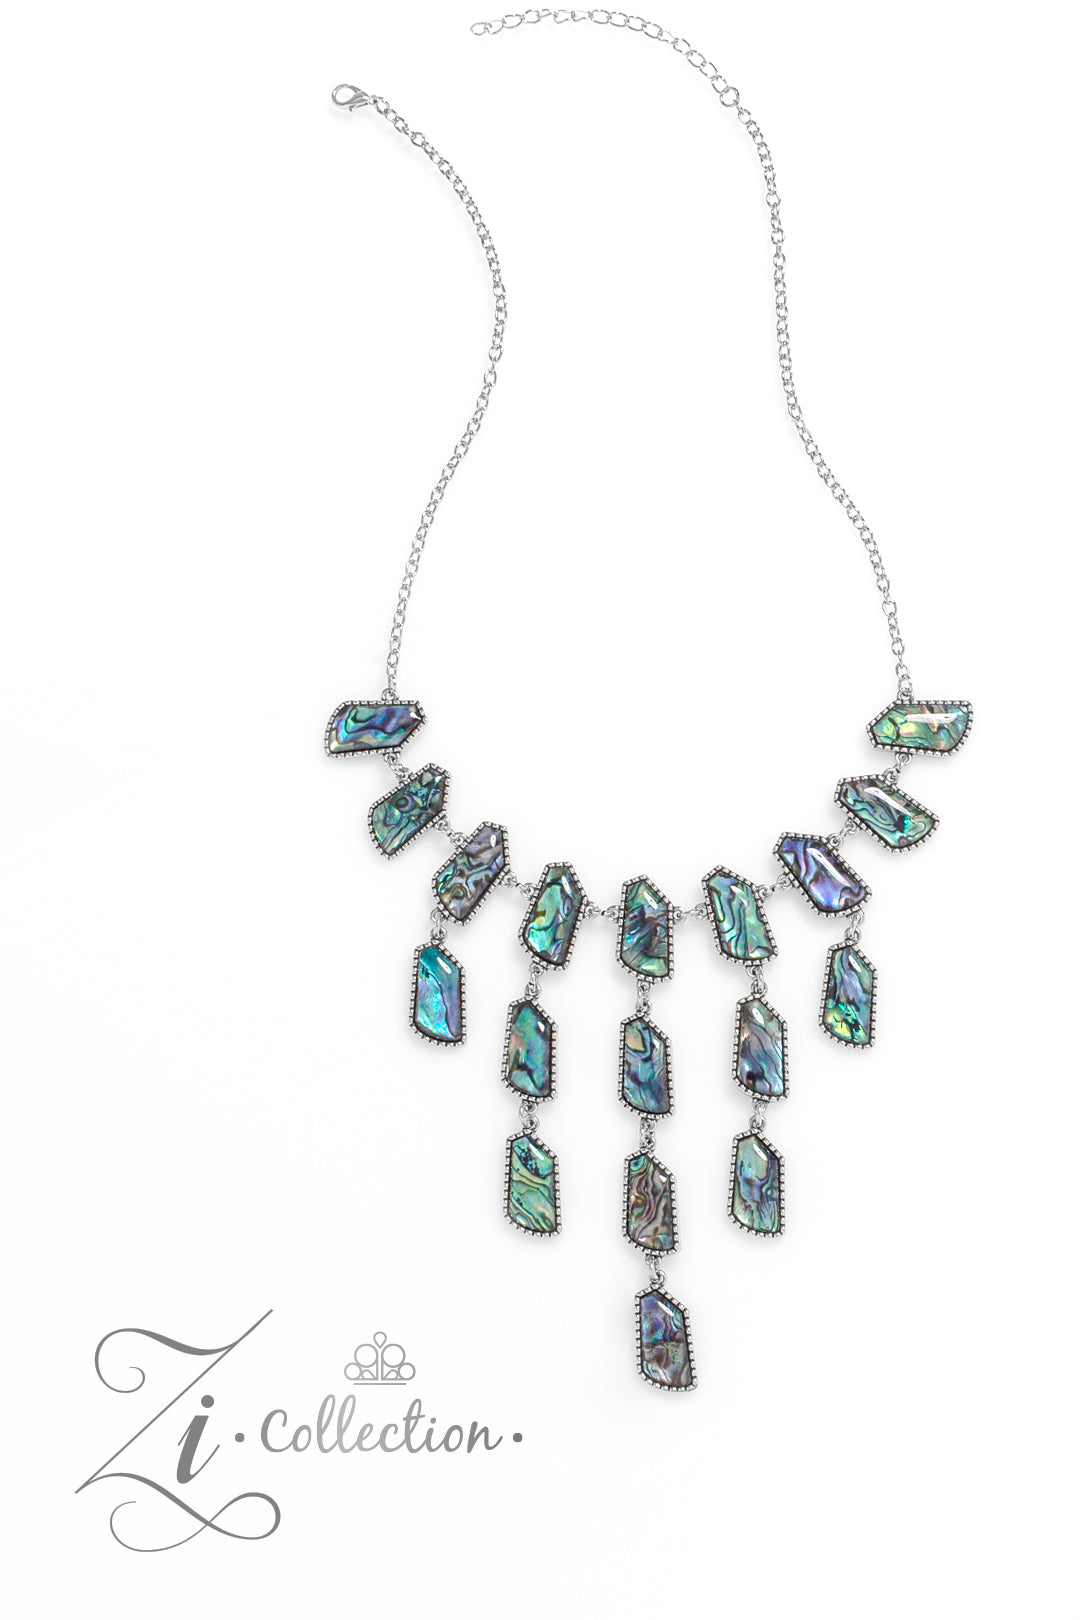 2023 Zi Collection Reverie Multi Necklace: Abalone shells, silver frames, pearlescent tassels. Includes matching earrings from A Finishing Touch Jewelry